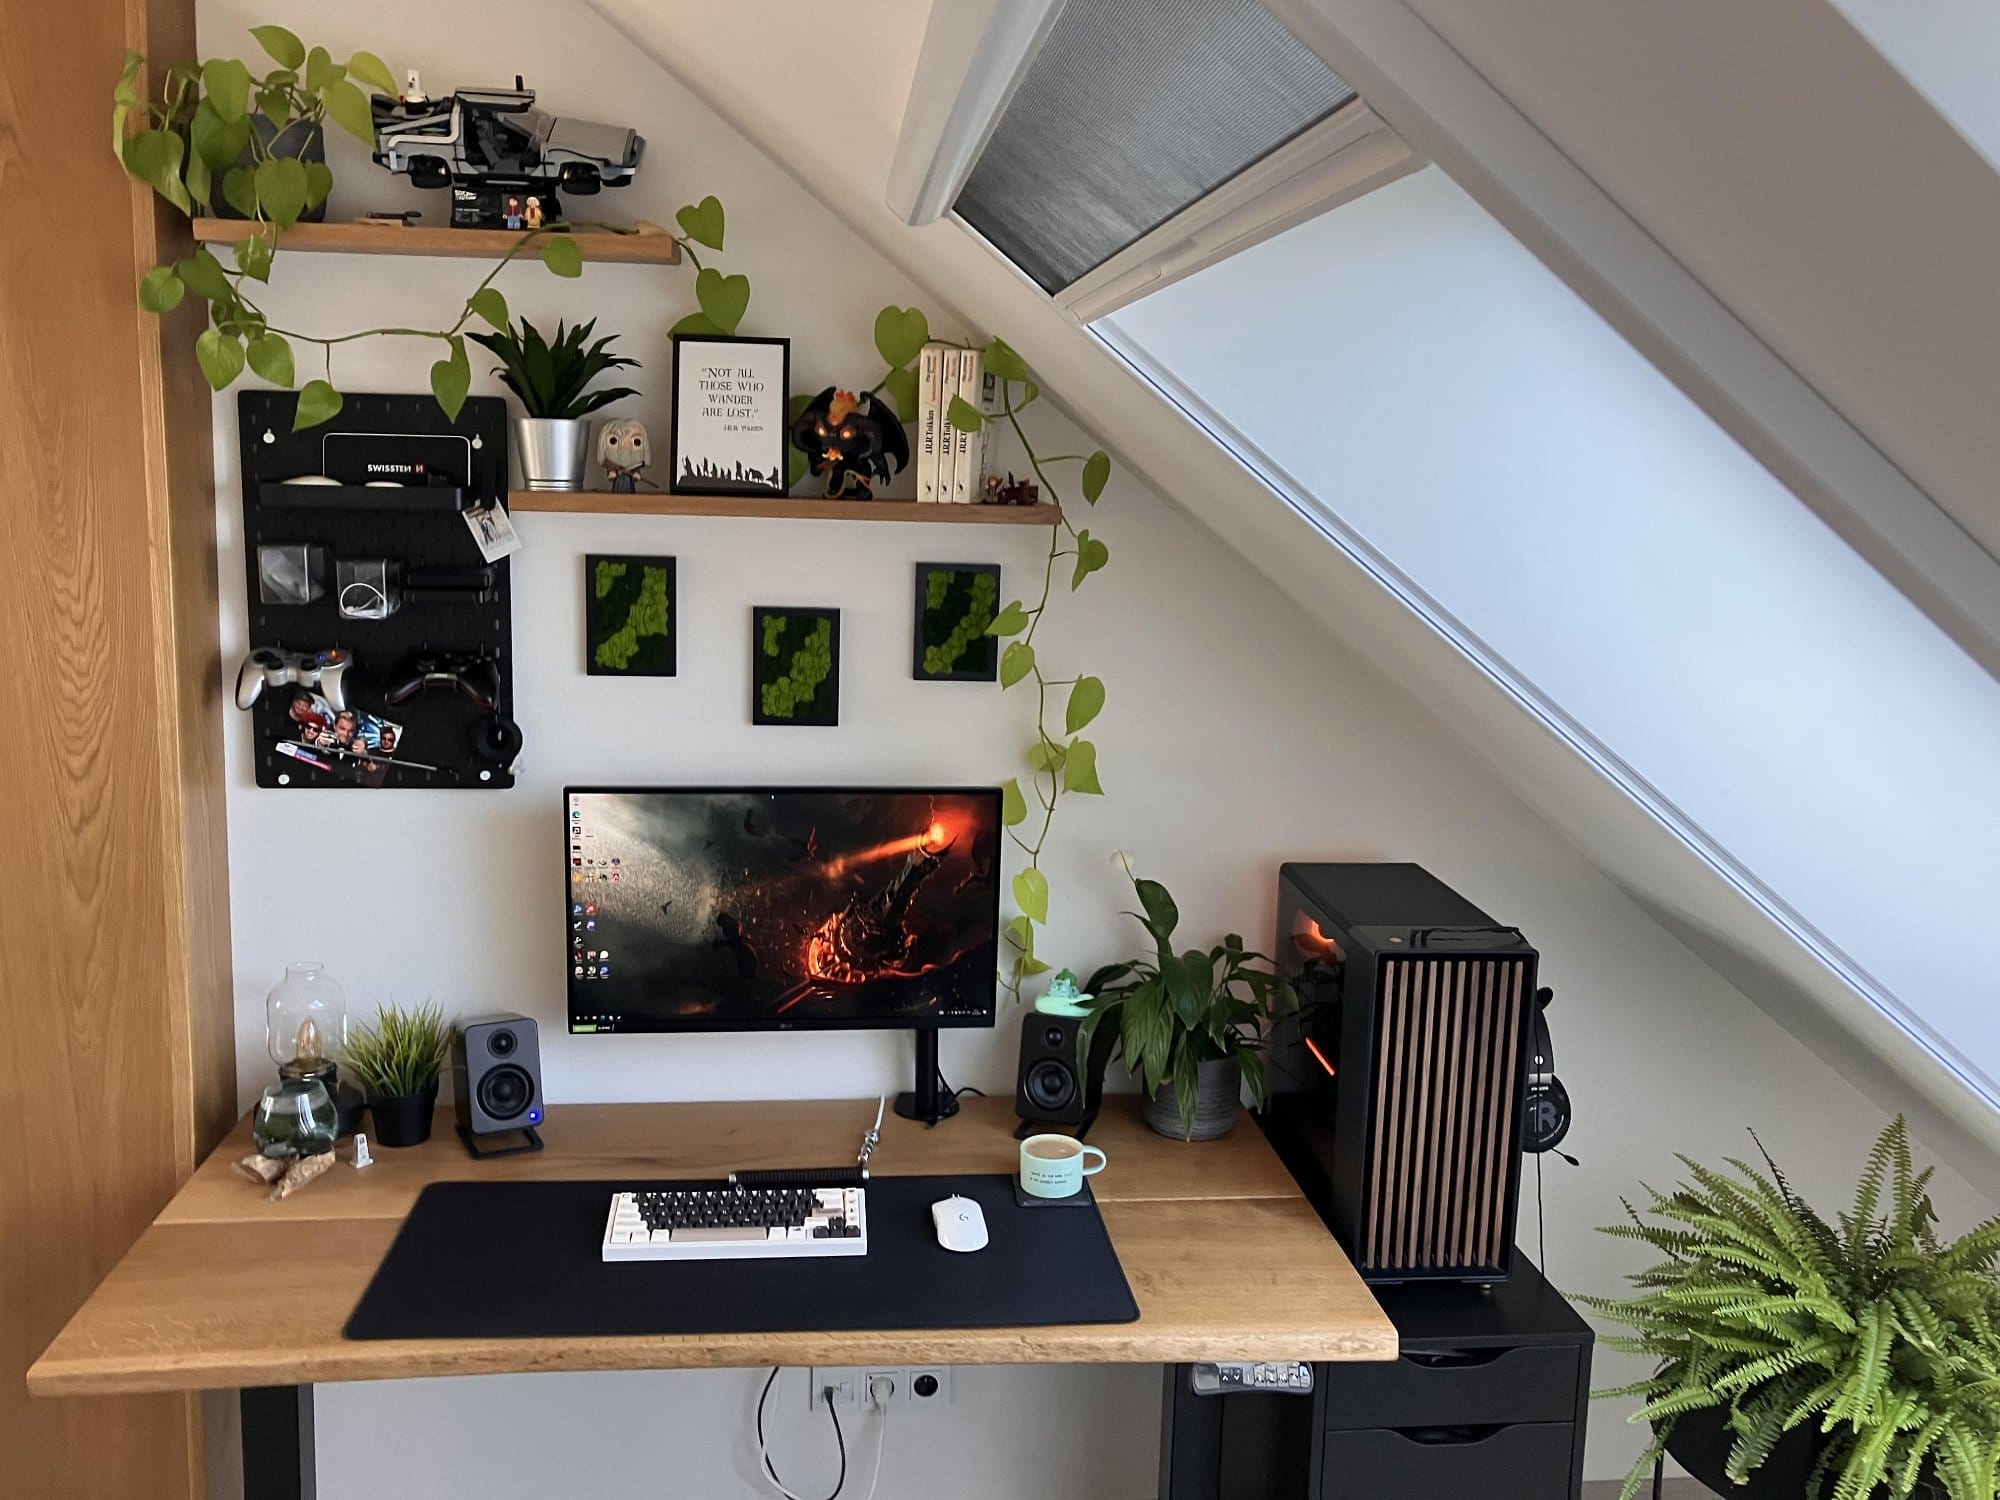 A neatly organised home office setup with a wooden desk, computer, and multiple plants, illuminated by natural light from a slanted window, featuring shelves with decor and greenery